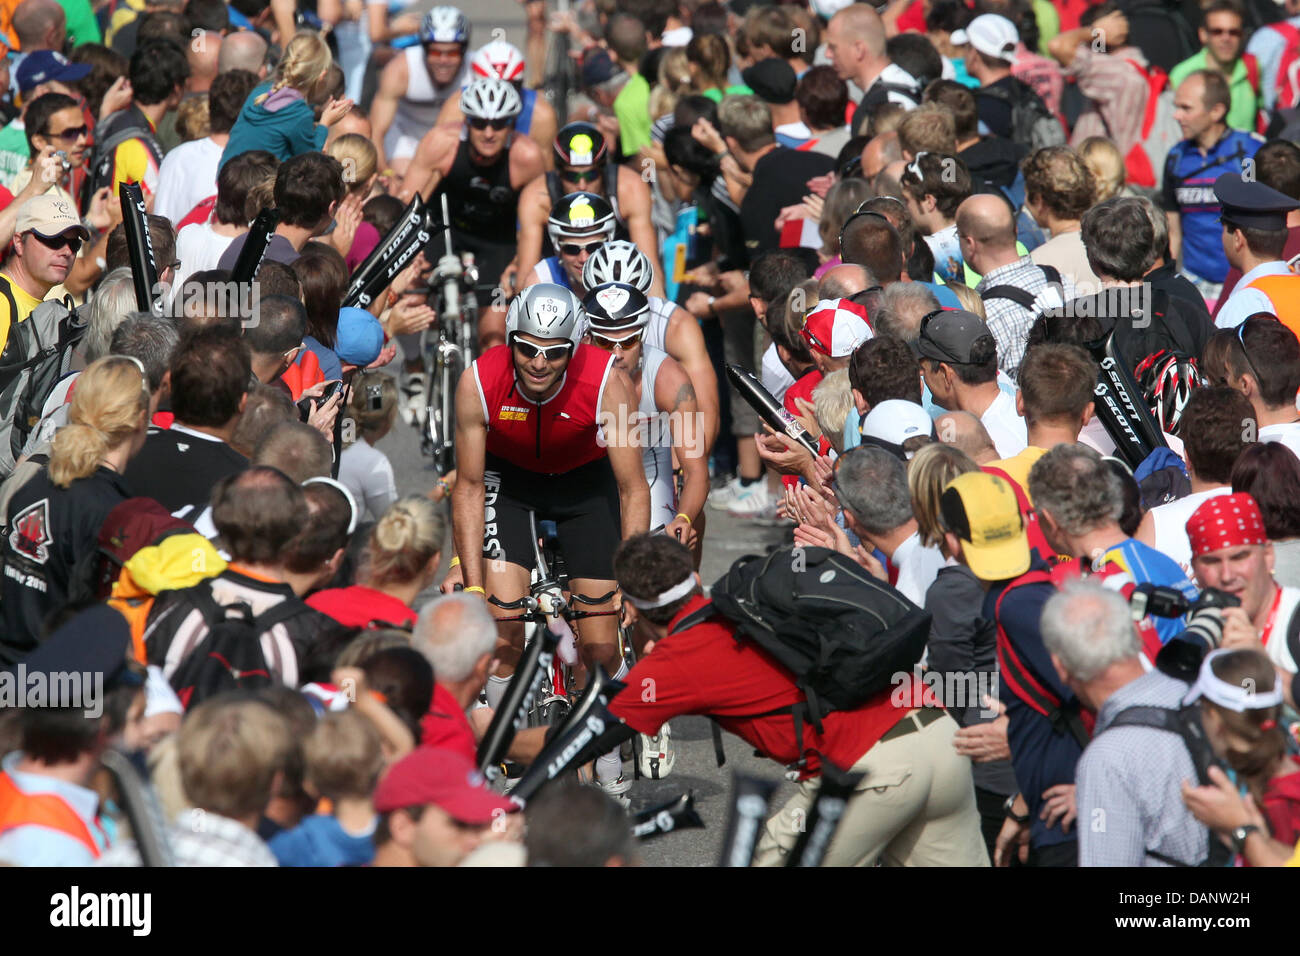 Triathletes ride uphill during the cycling etappe of the 10th Ironman Challenge in Hipoltstein, Germany, 10 July 2011. For the ironman, the participants have to swim 3,8 km, cycle 180 km and run 42,195 km. Photo: Daniel Karmann Stock Photo